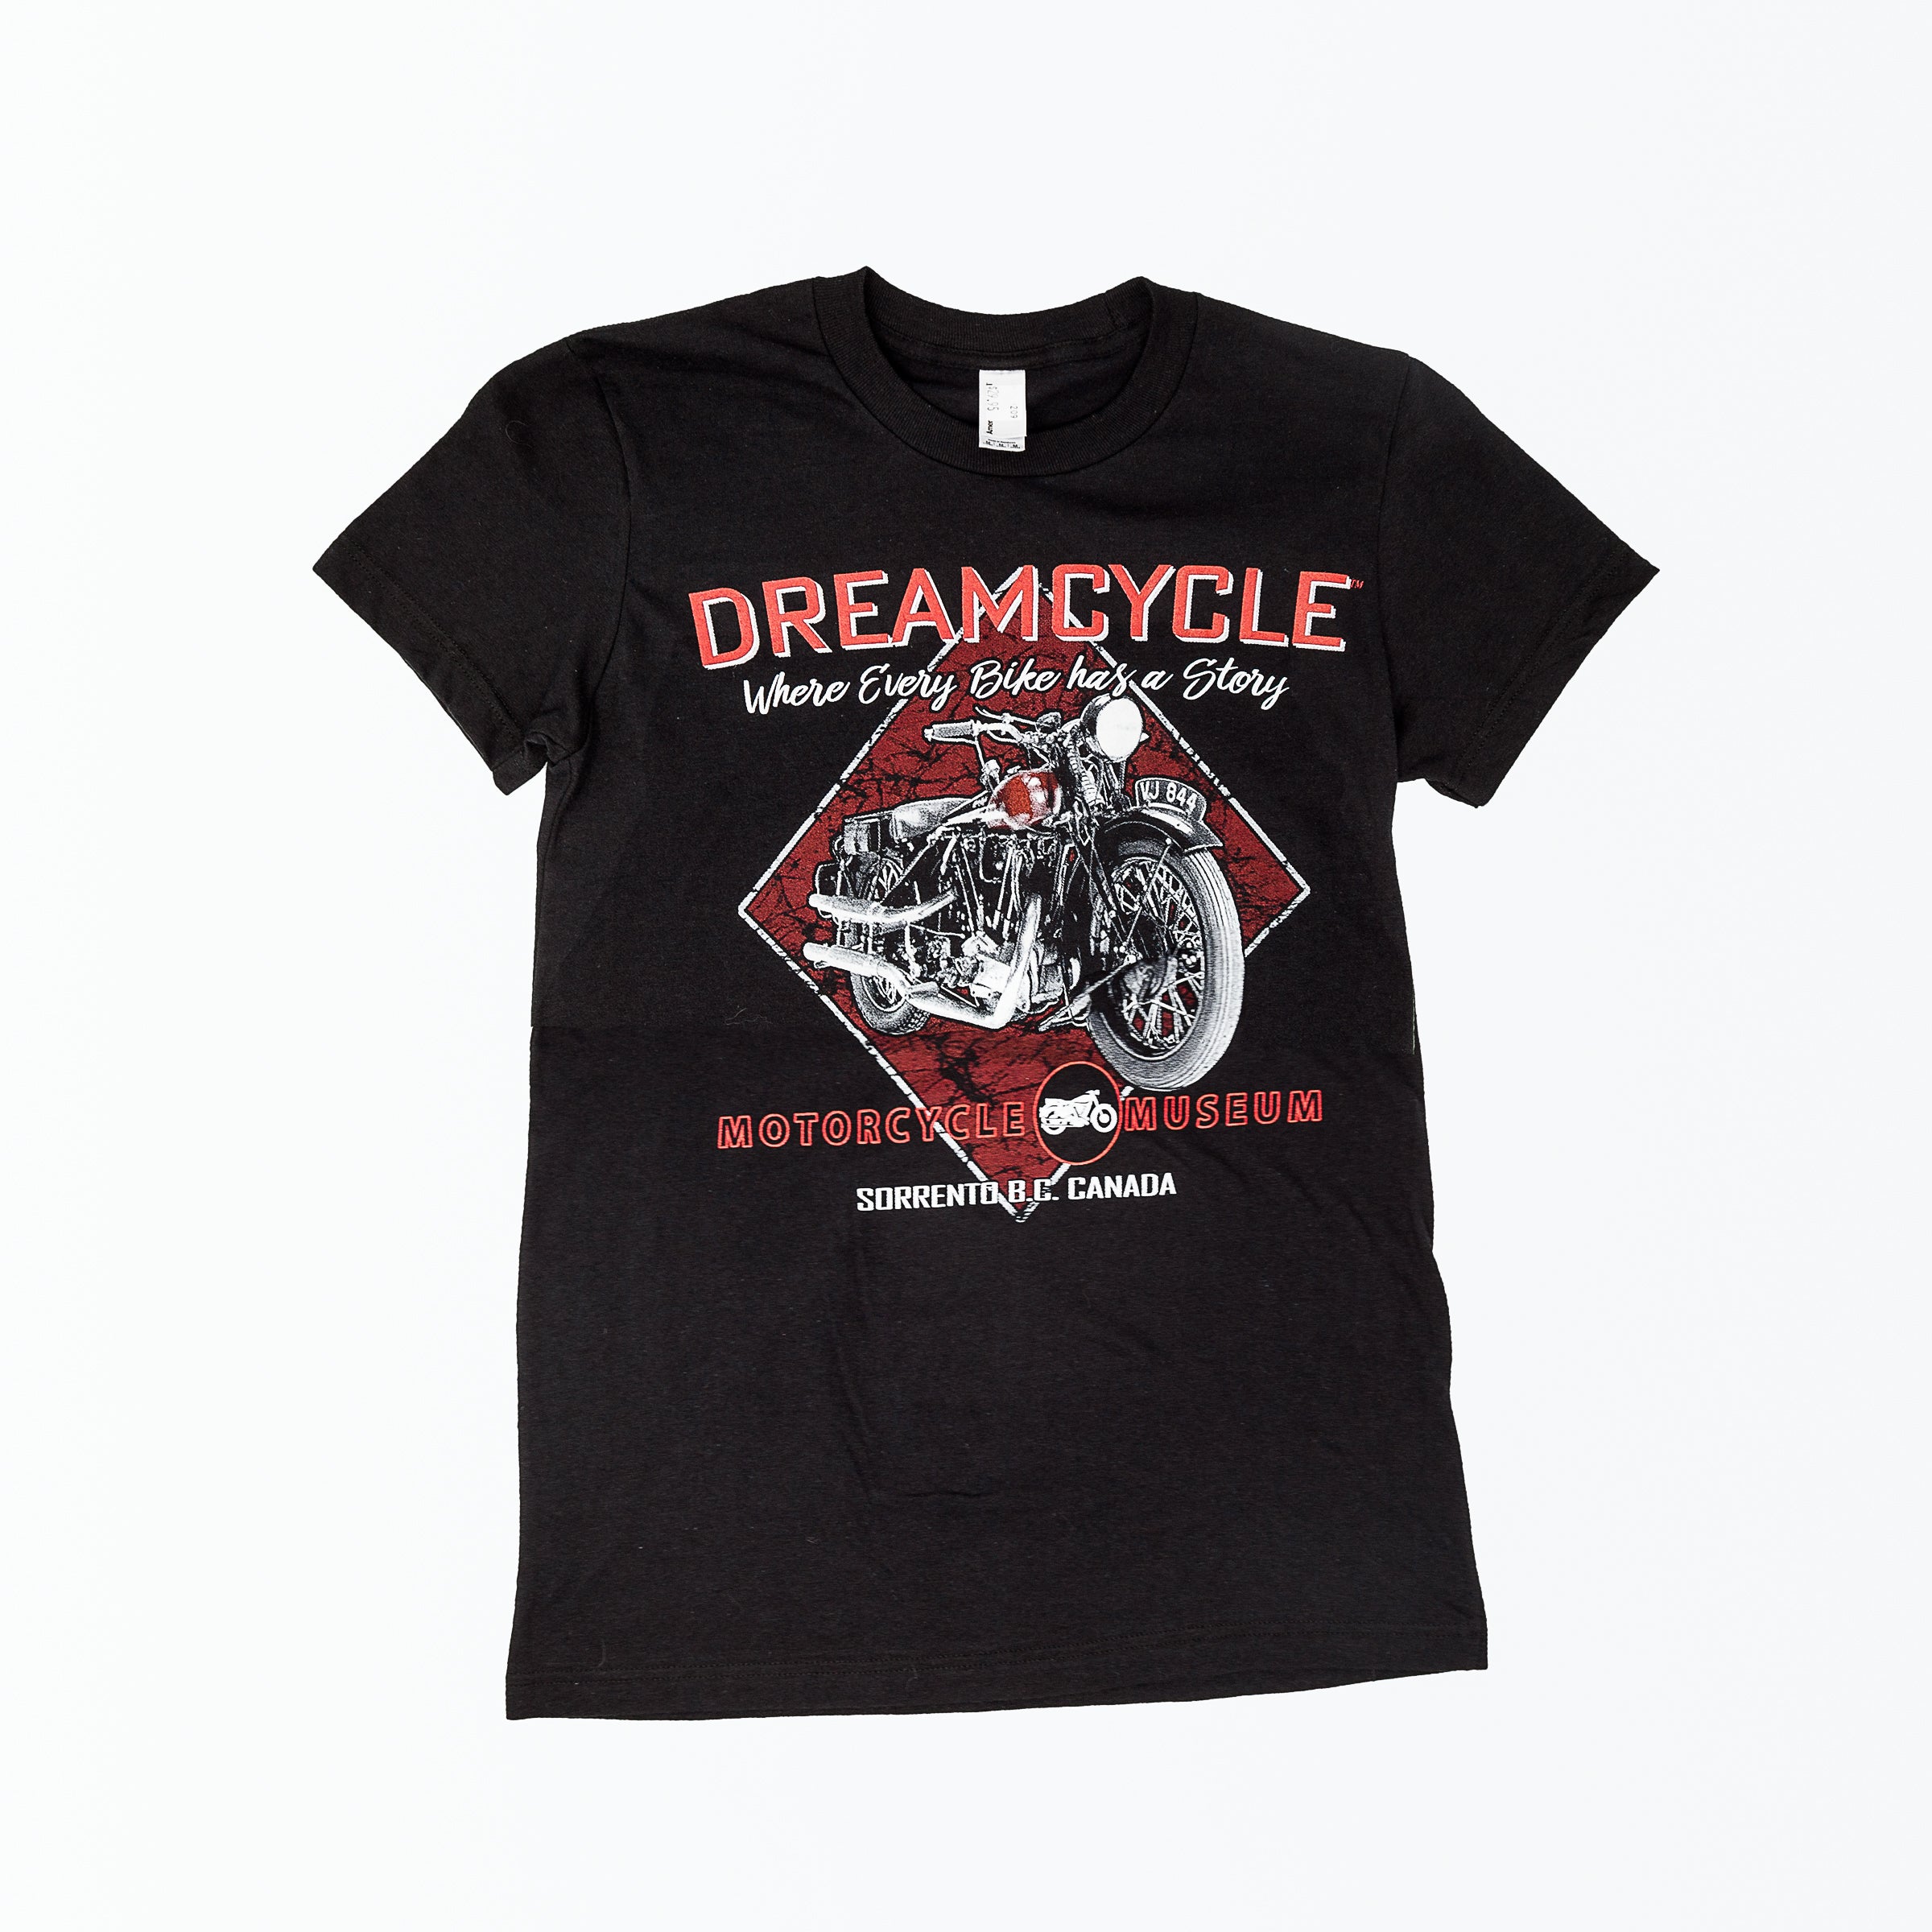 Dreamcycle Motorcycle Museum |  Dreamcycle tshirt on white background.